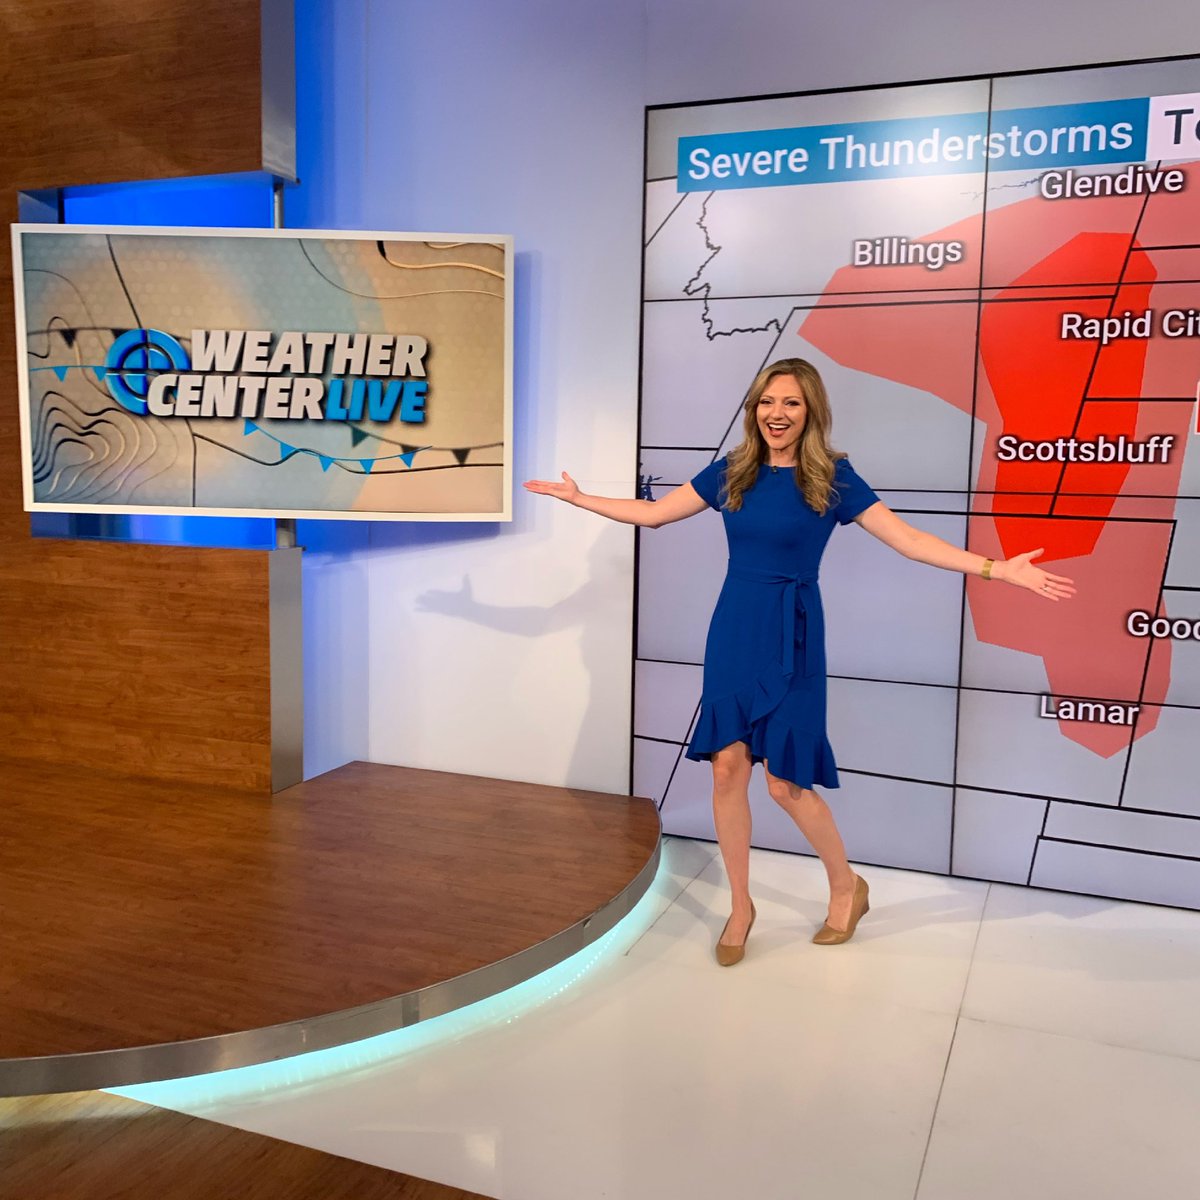 Colleen Coyle wearing a blue dress during her live weather broadcast